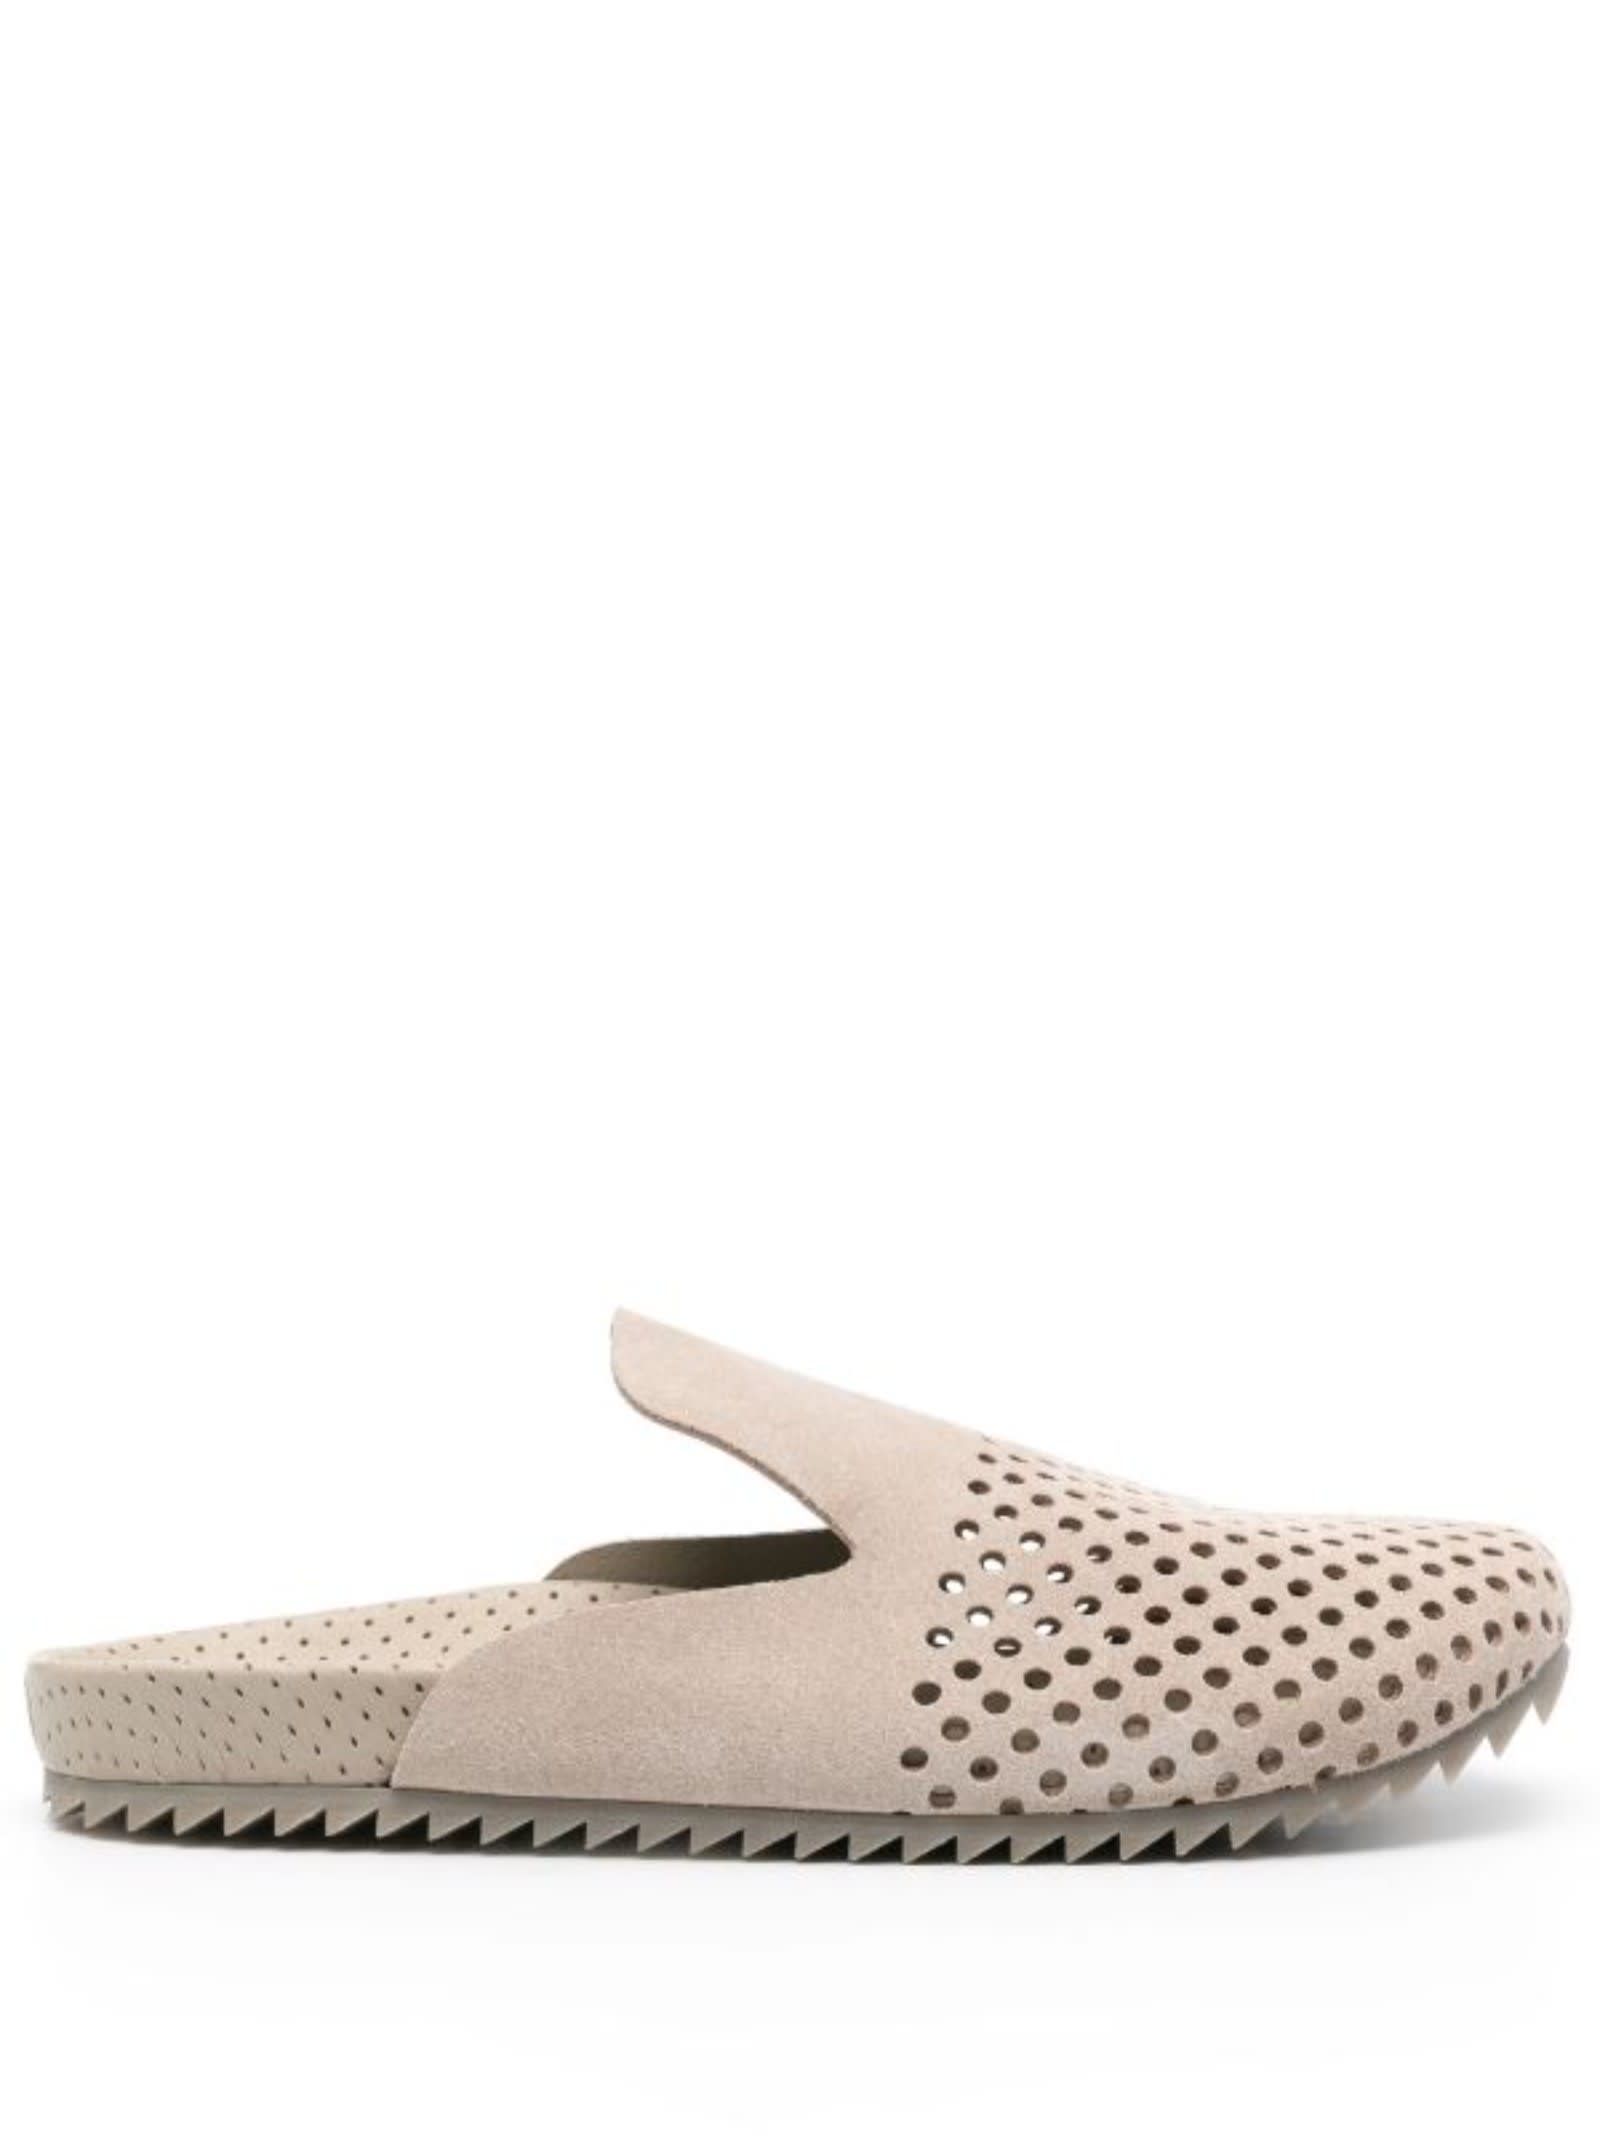 Pedro Garcia Casual Suede Slippers In Neutral